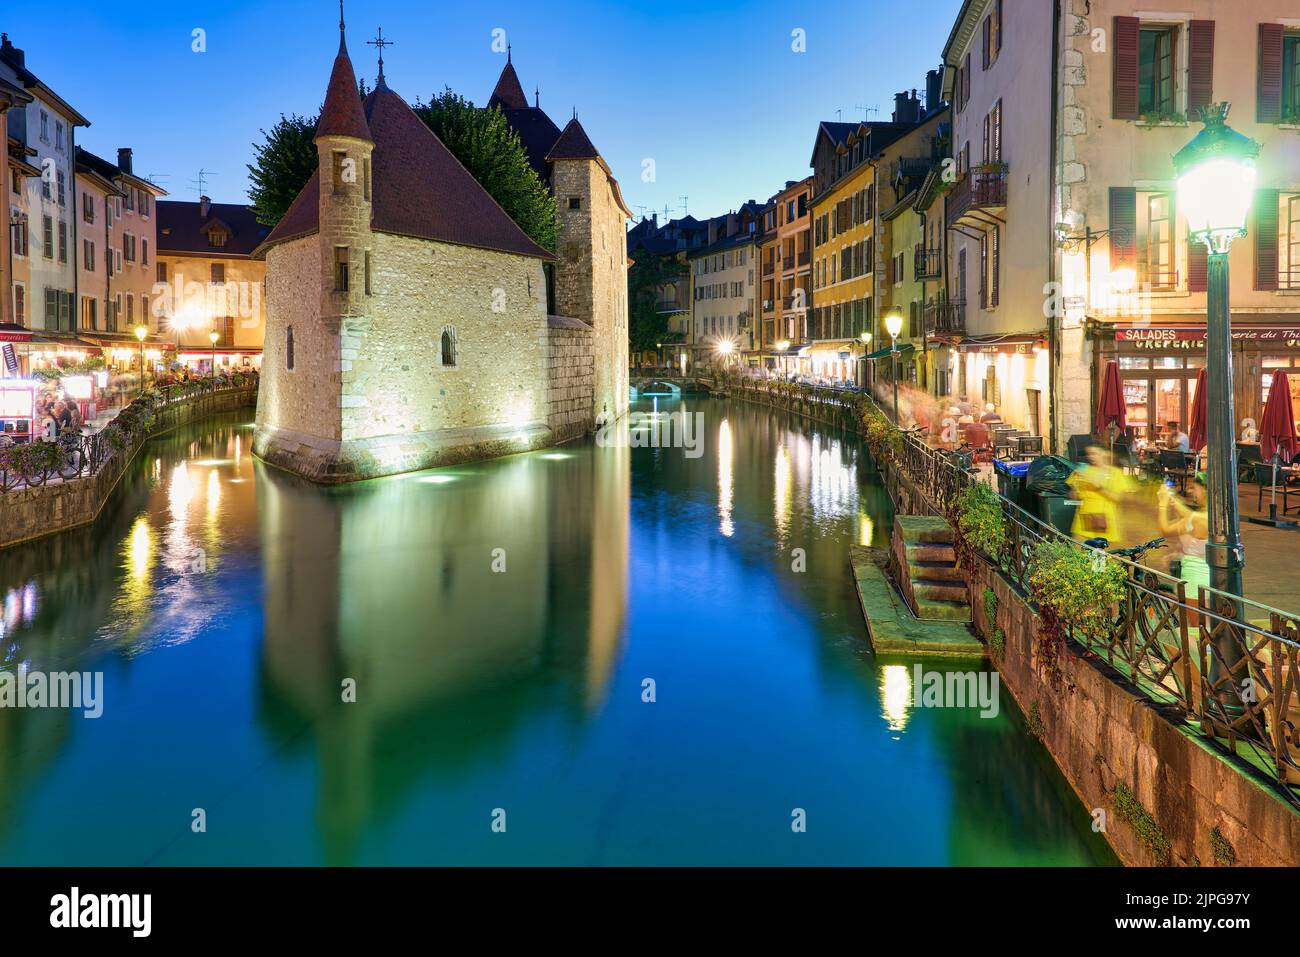 Annecy Haute Savoie France. The Palais de l'Isle and Thiou river at sunset Stock Photo